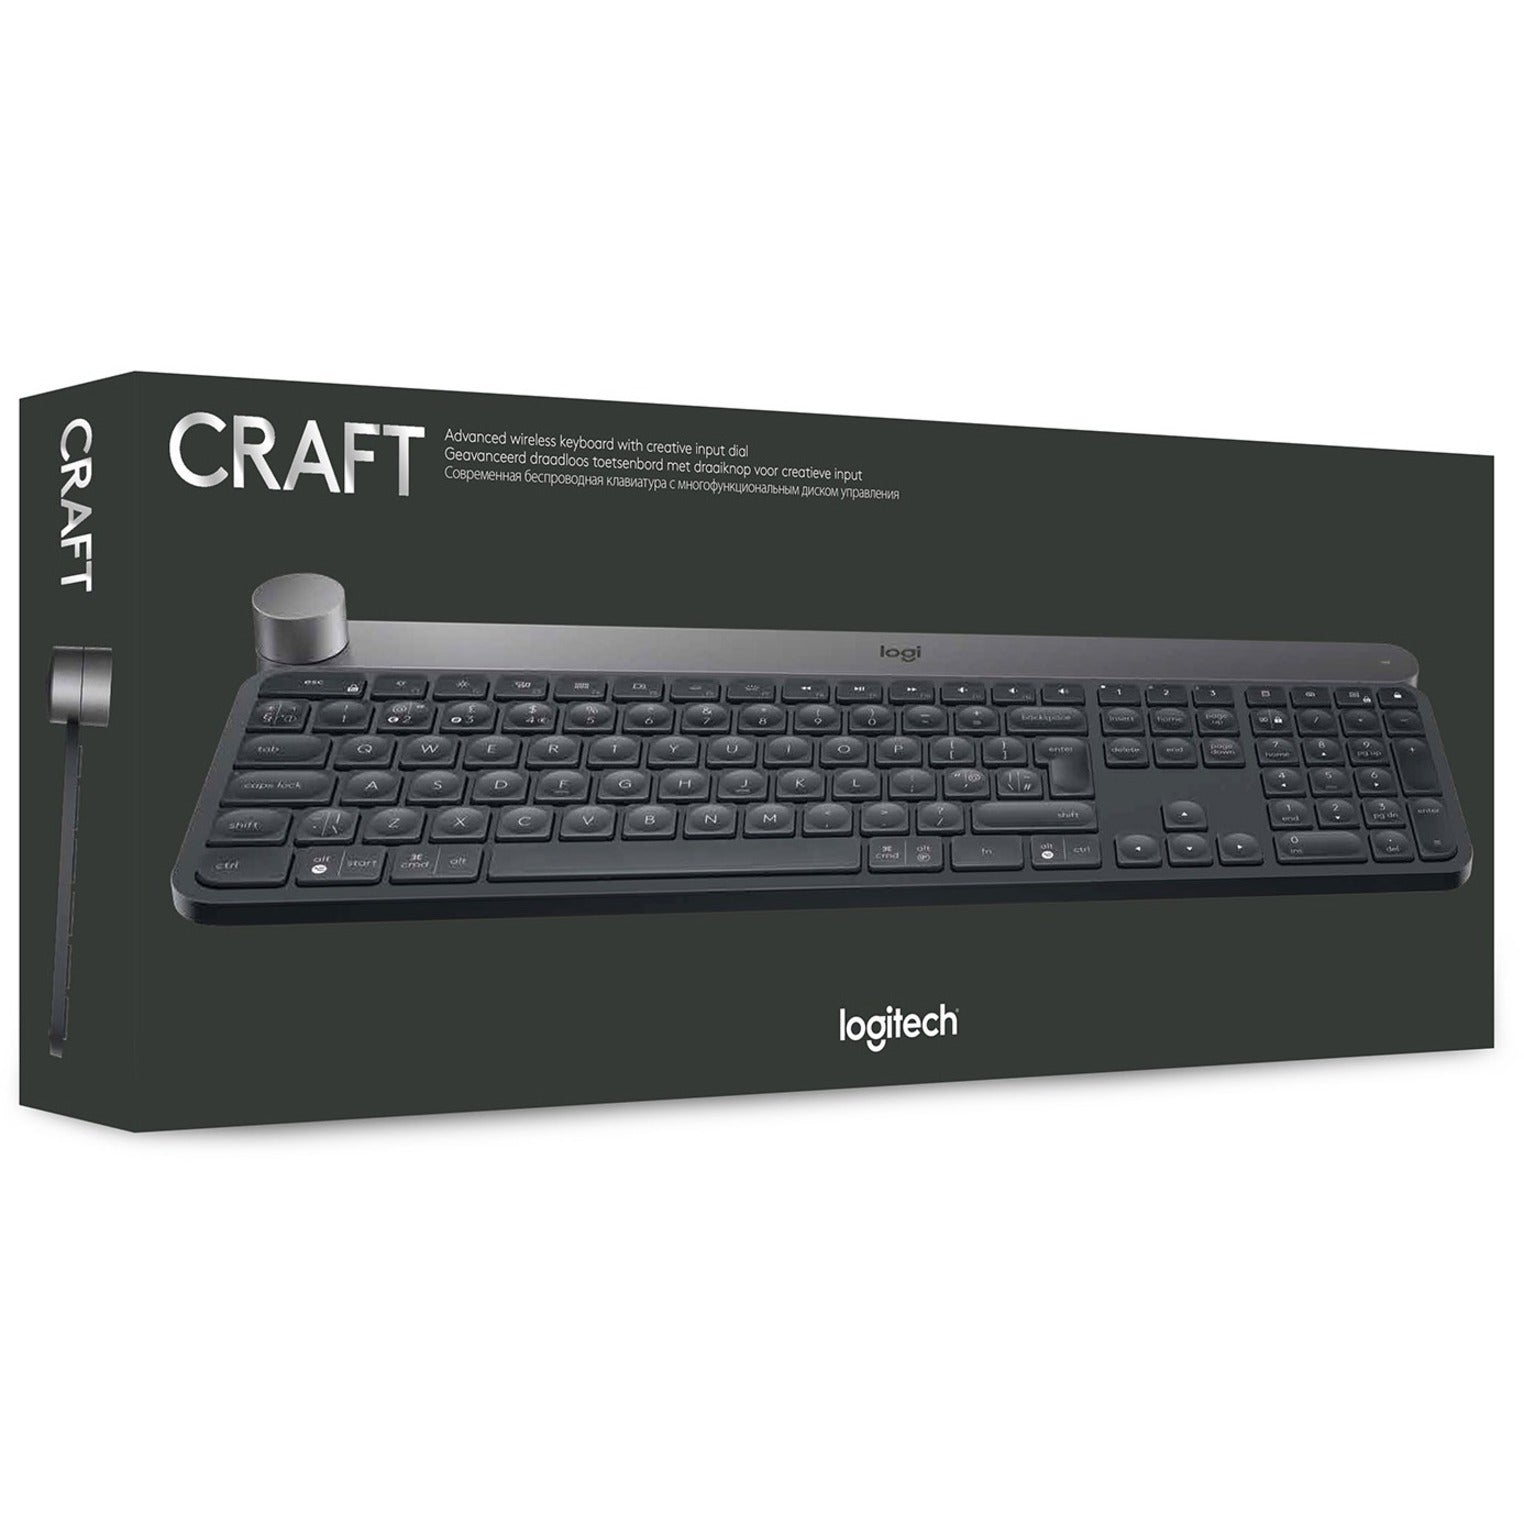 Logitech Craft Advanced Keyboard with Creative Input Dial [Discontinued]